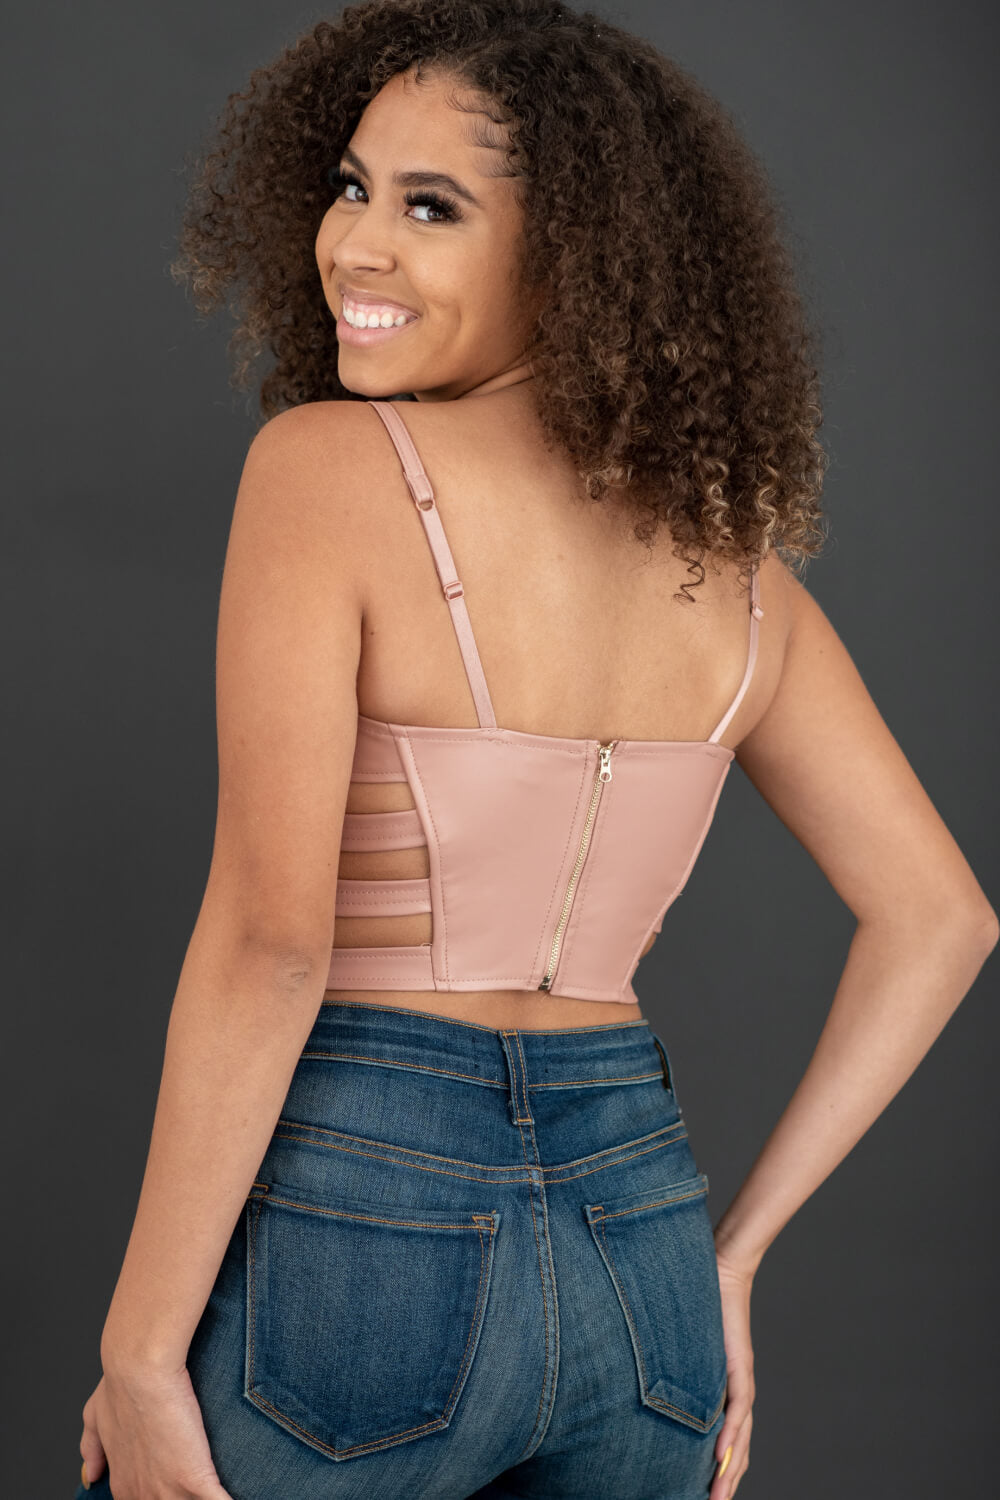 SHOPIRISBASIC Ready to Go Faux Leather Strappy Bustier Crop Top Trendsi 